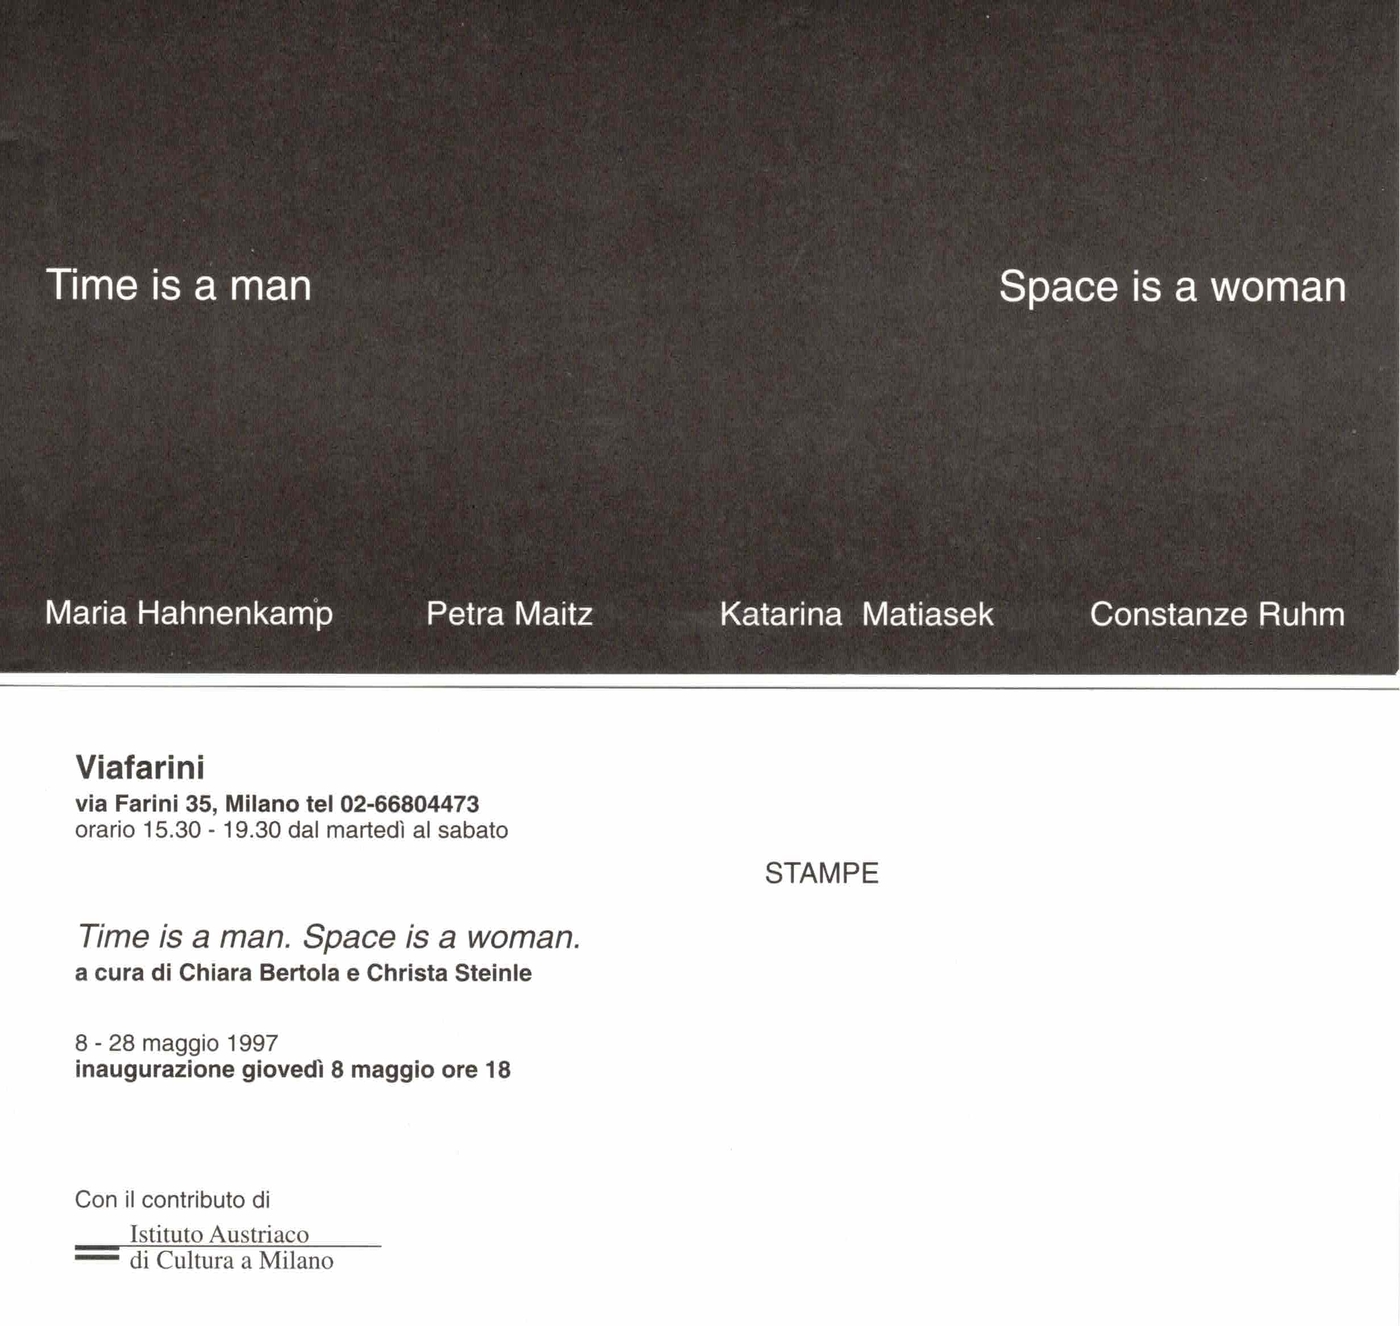 Time is a man. Space is a woman, L'invito